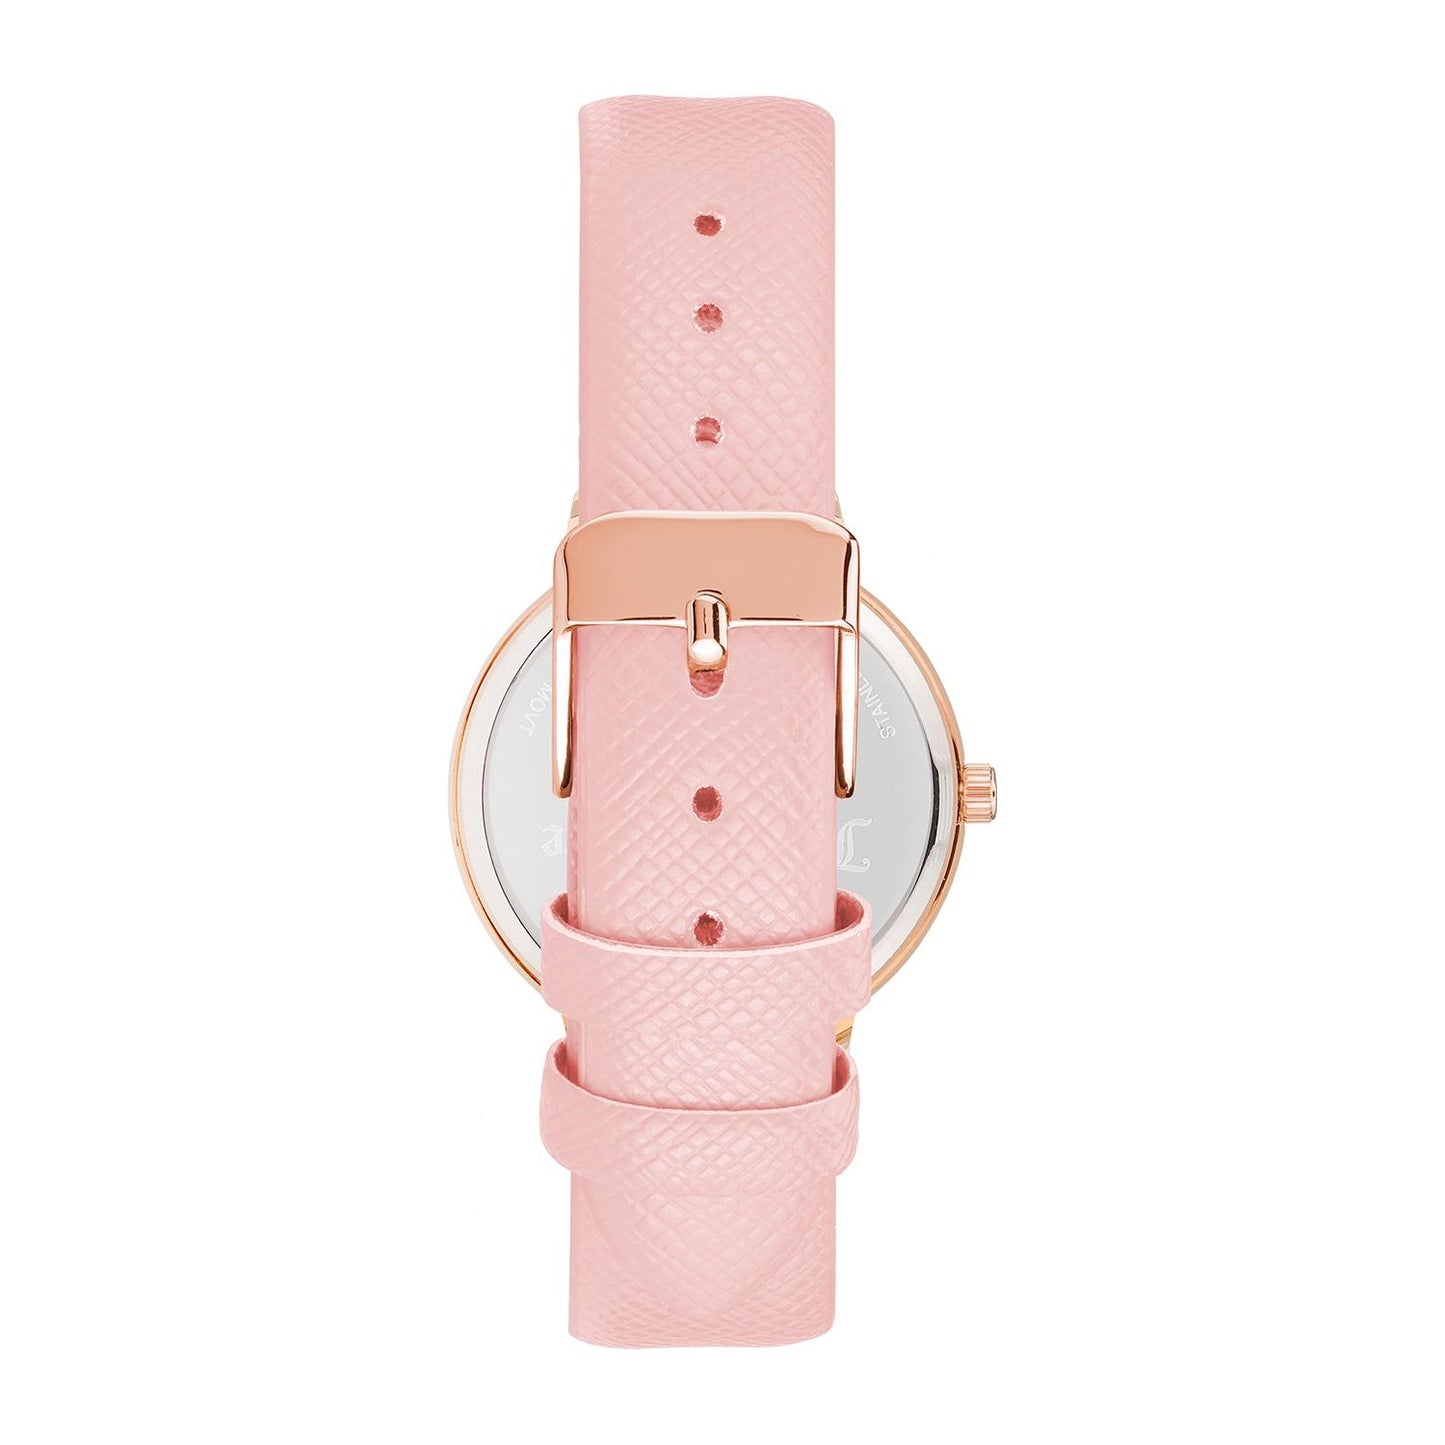 JUICY COUTURE JUICY COUTURE MOD. JC_1234RGPK WATCHES juicy-couture-mod-jc_1234rgpk